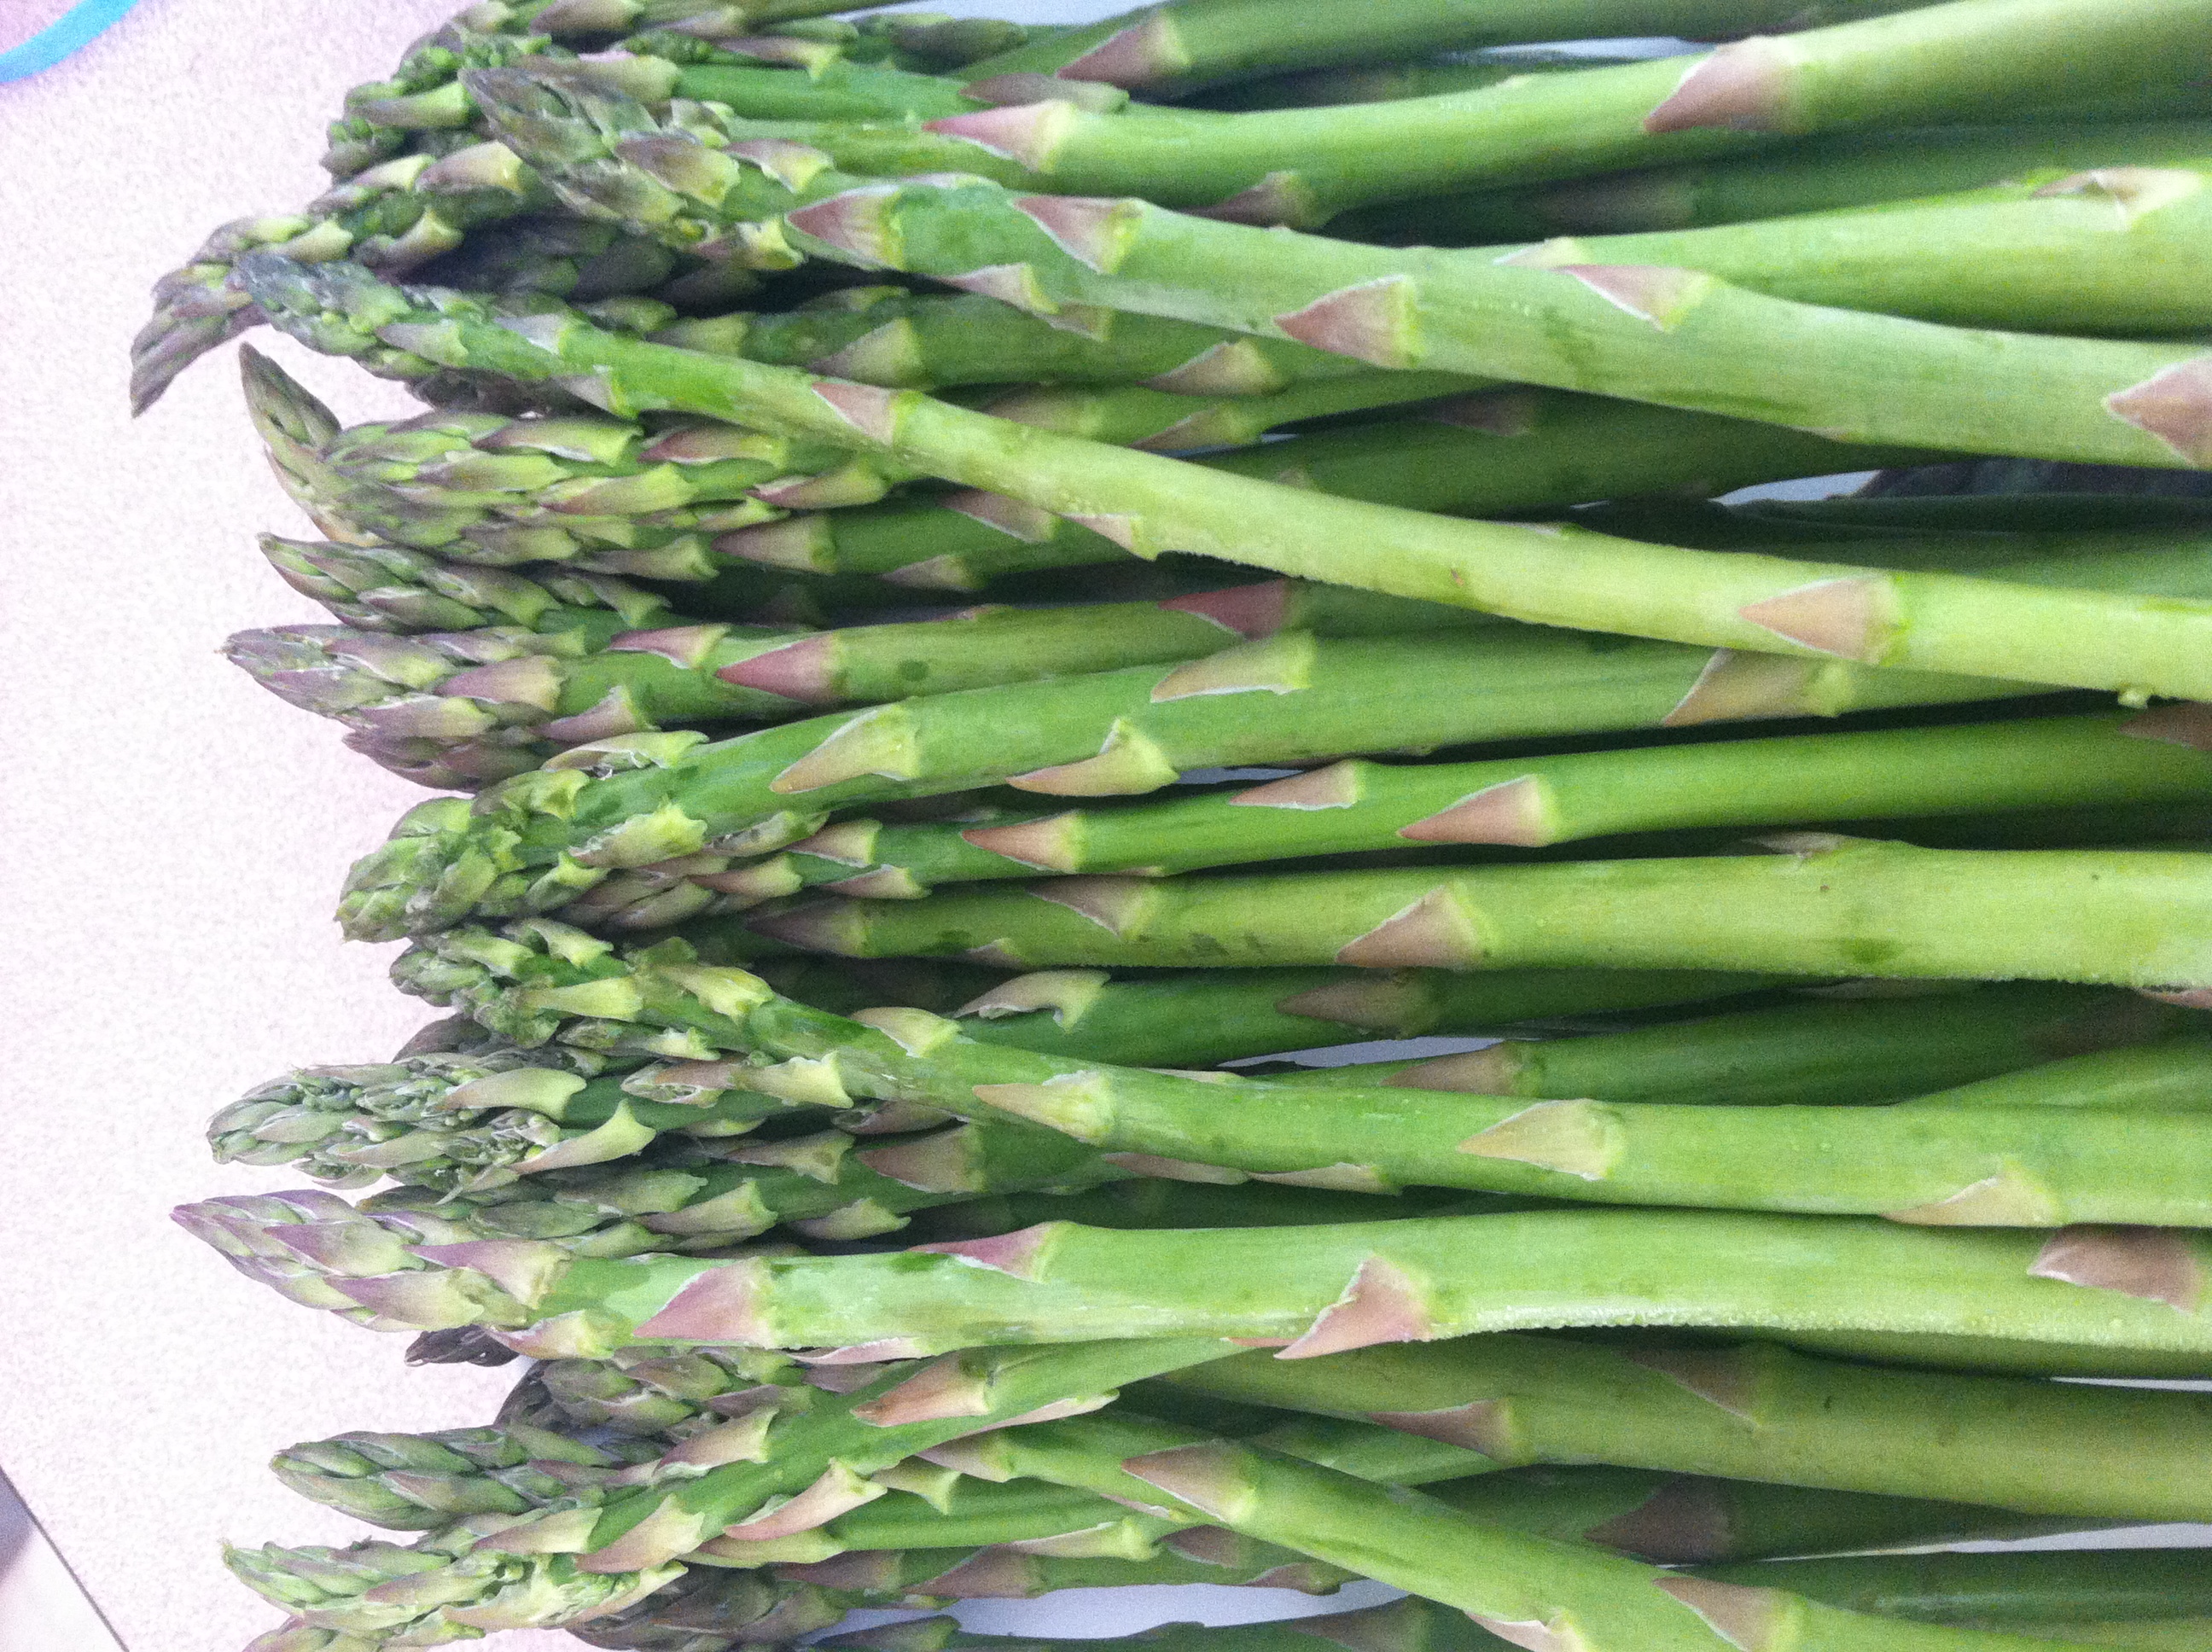 RapidBlog: Asparagus: They're Stalking Michigan!, by Chef Ray